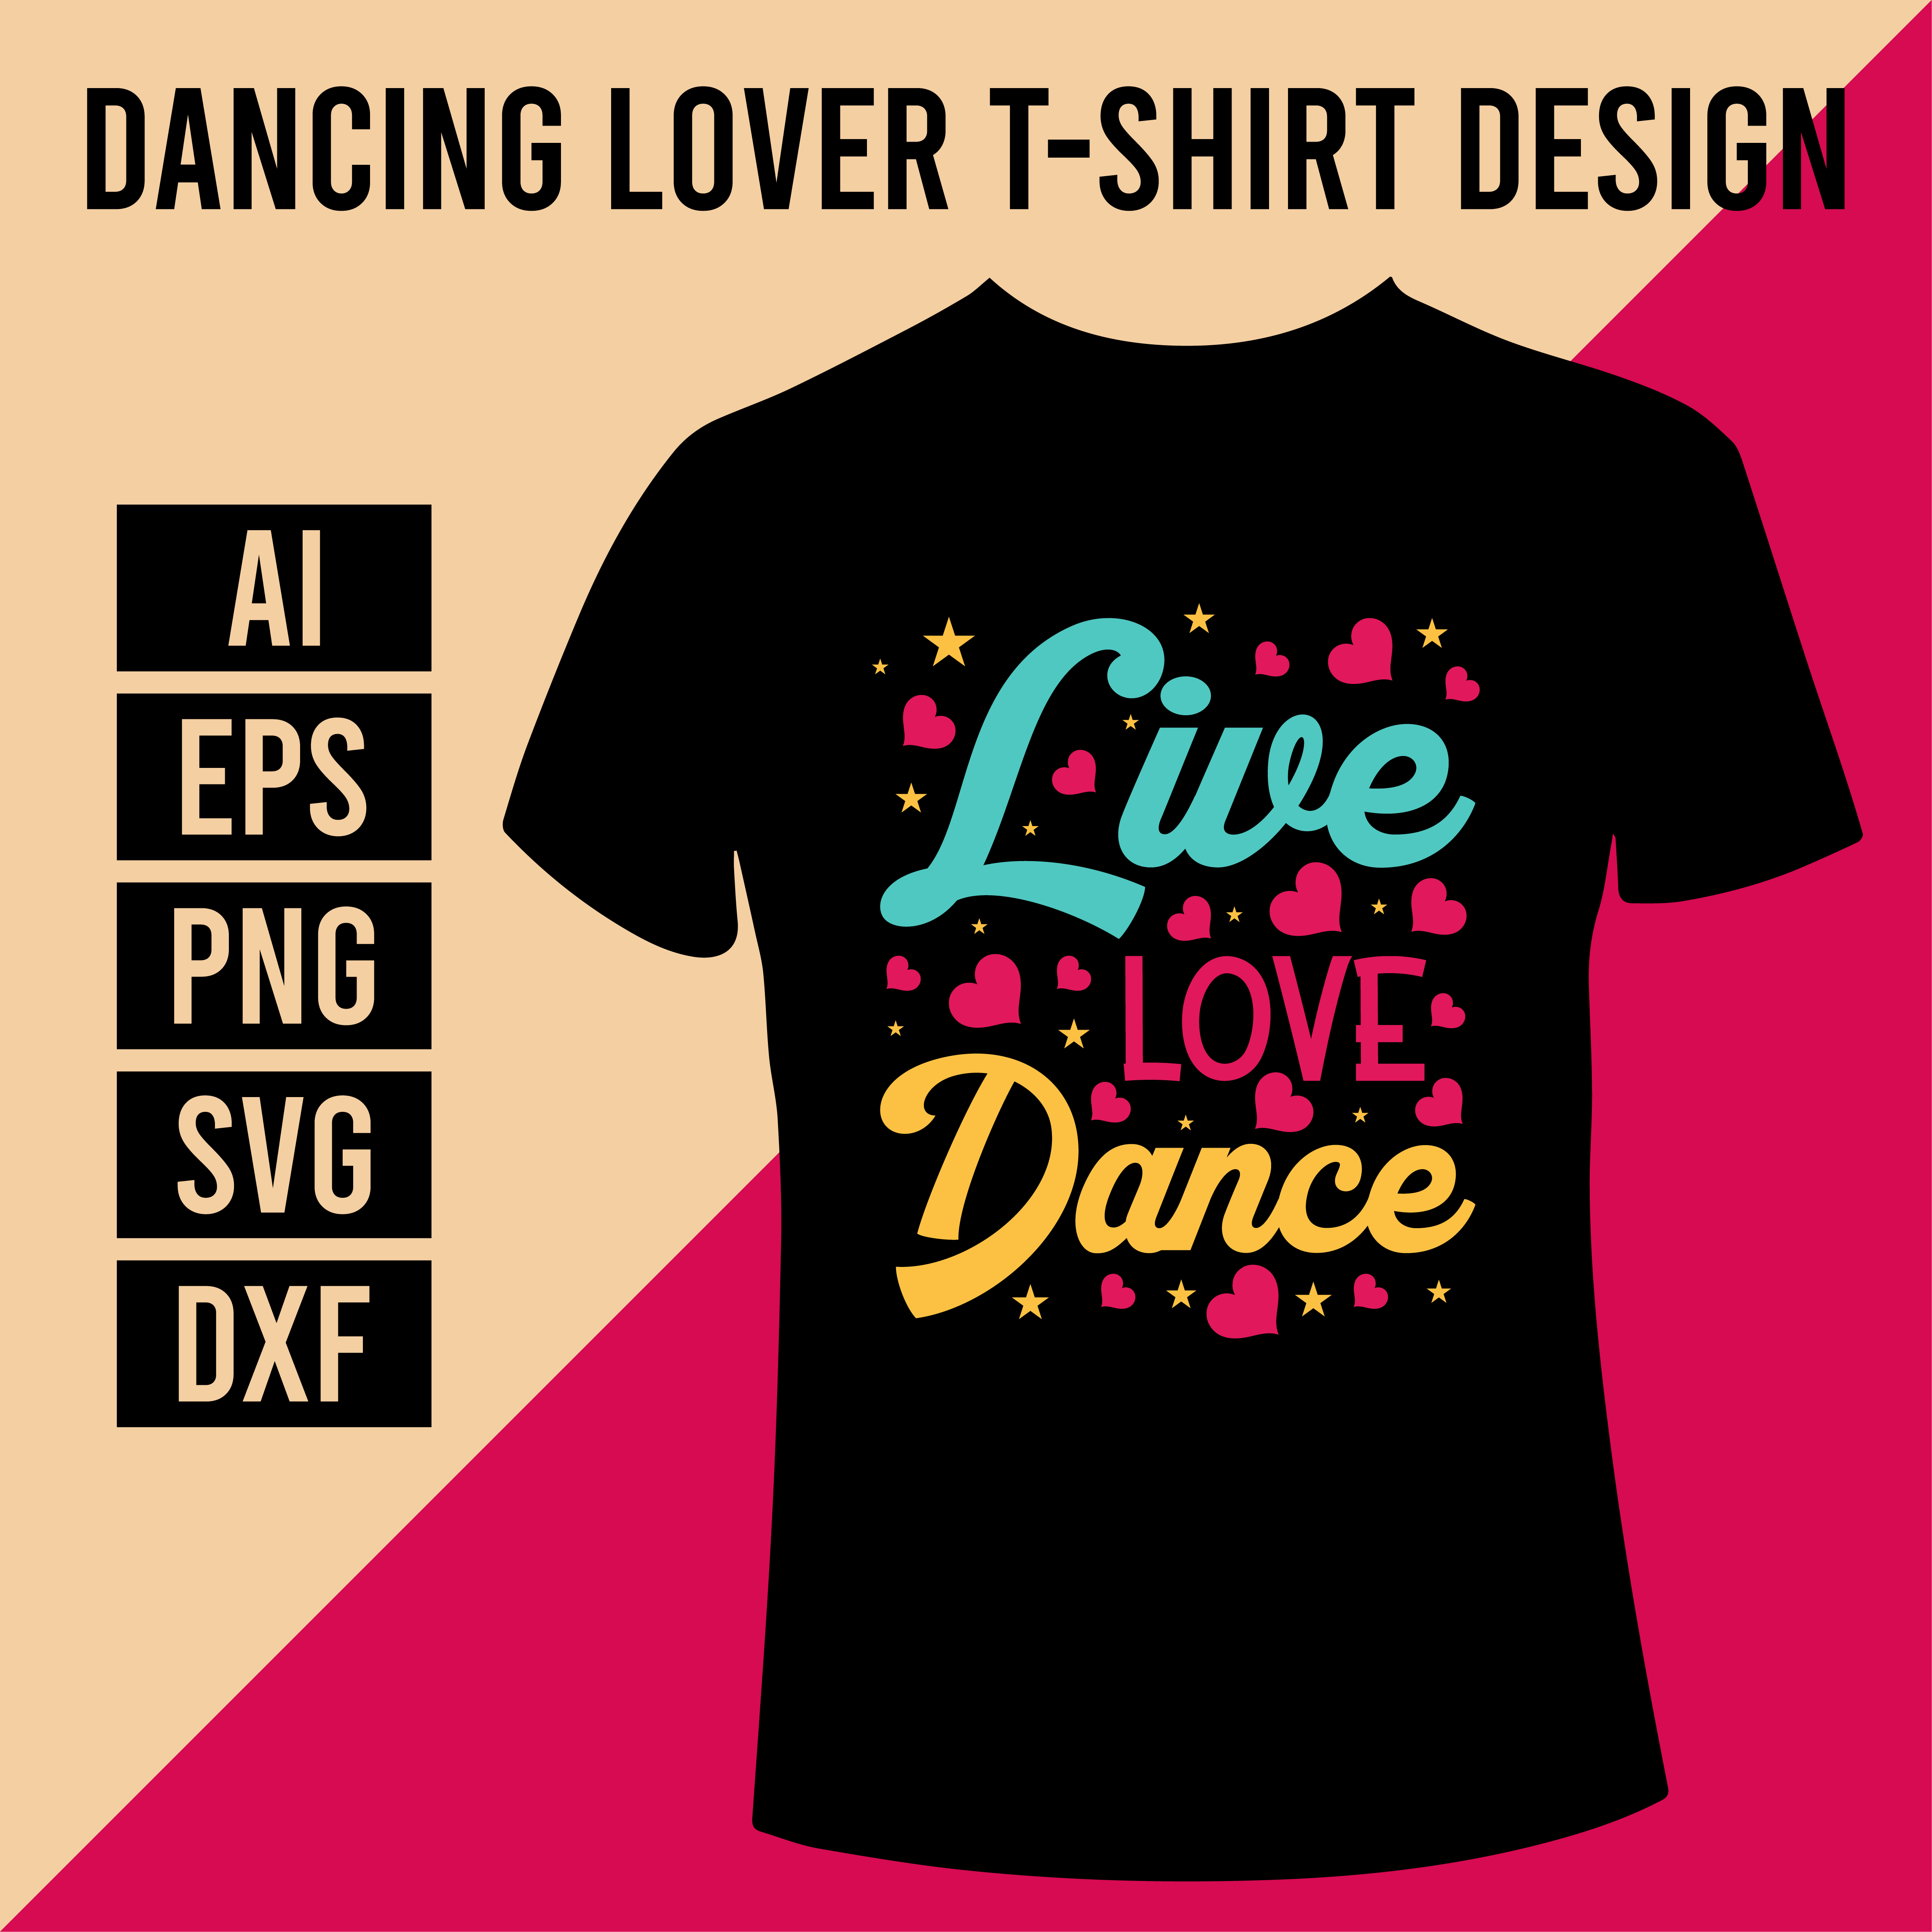 Dancing Lover T-Shirt Design cover image.